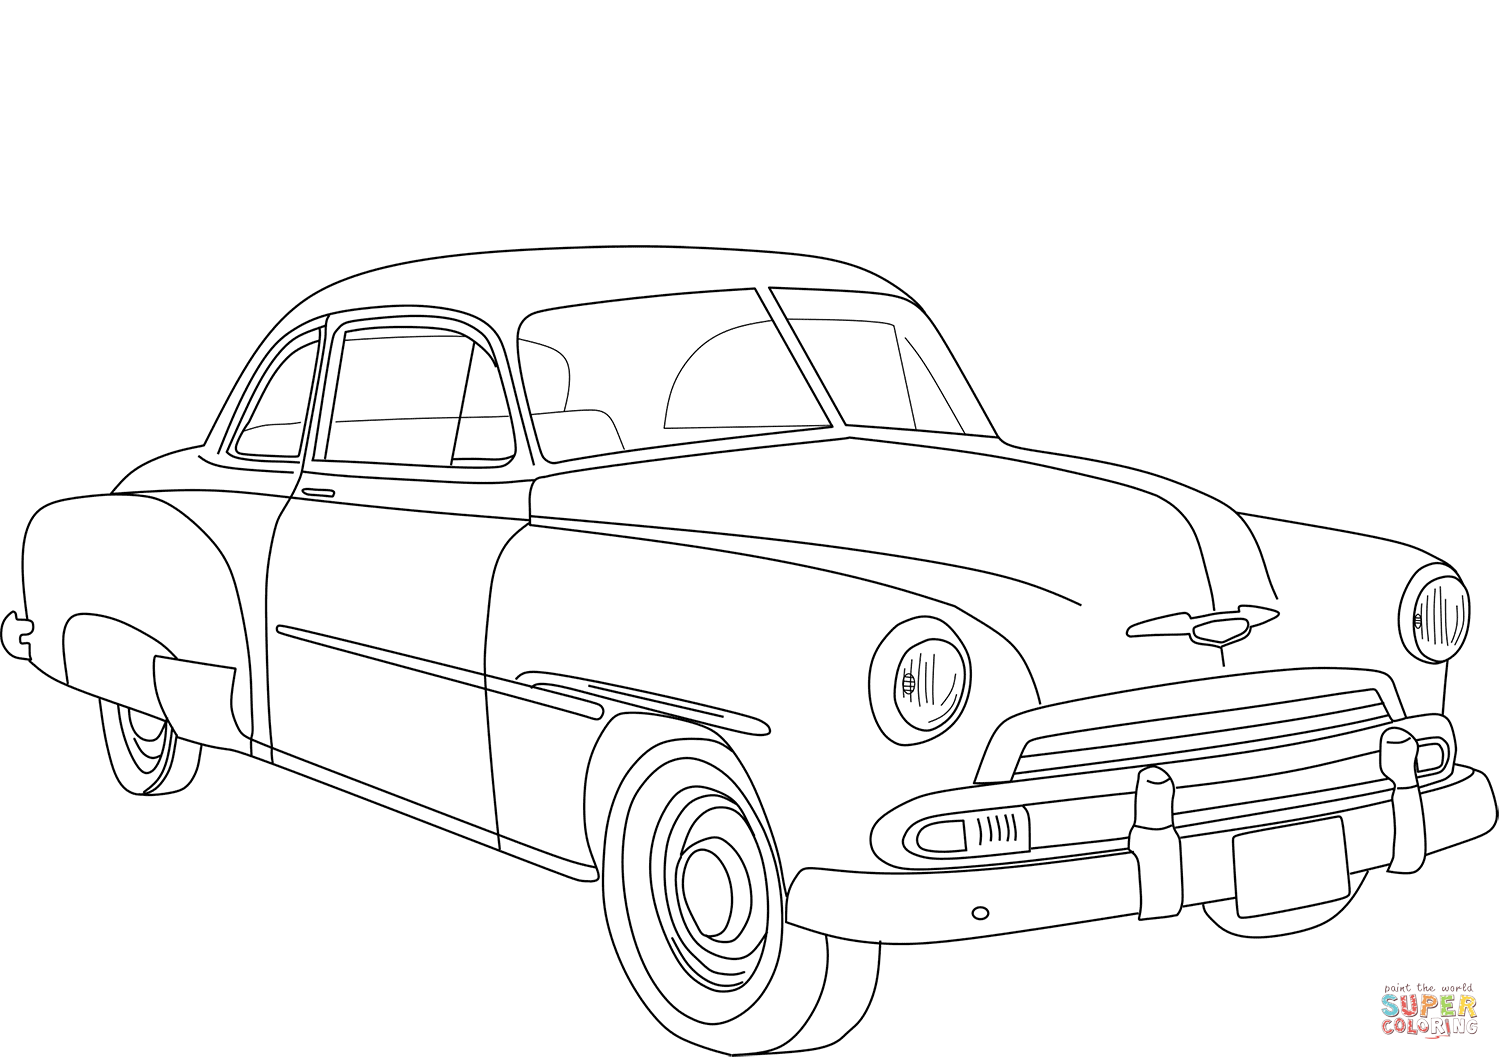 1951 Chevrolet Deluxe Coupe coloring page | Free Printable ...